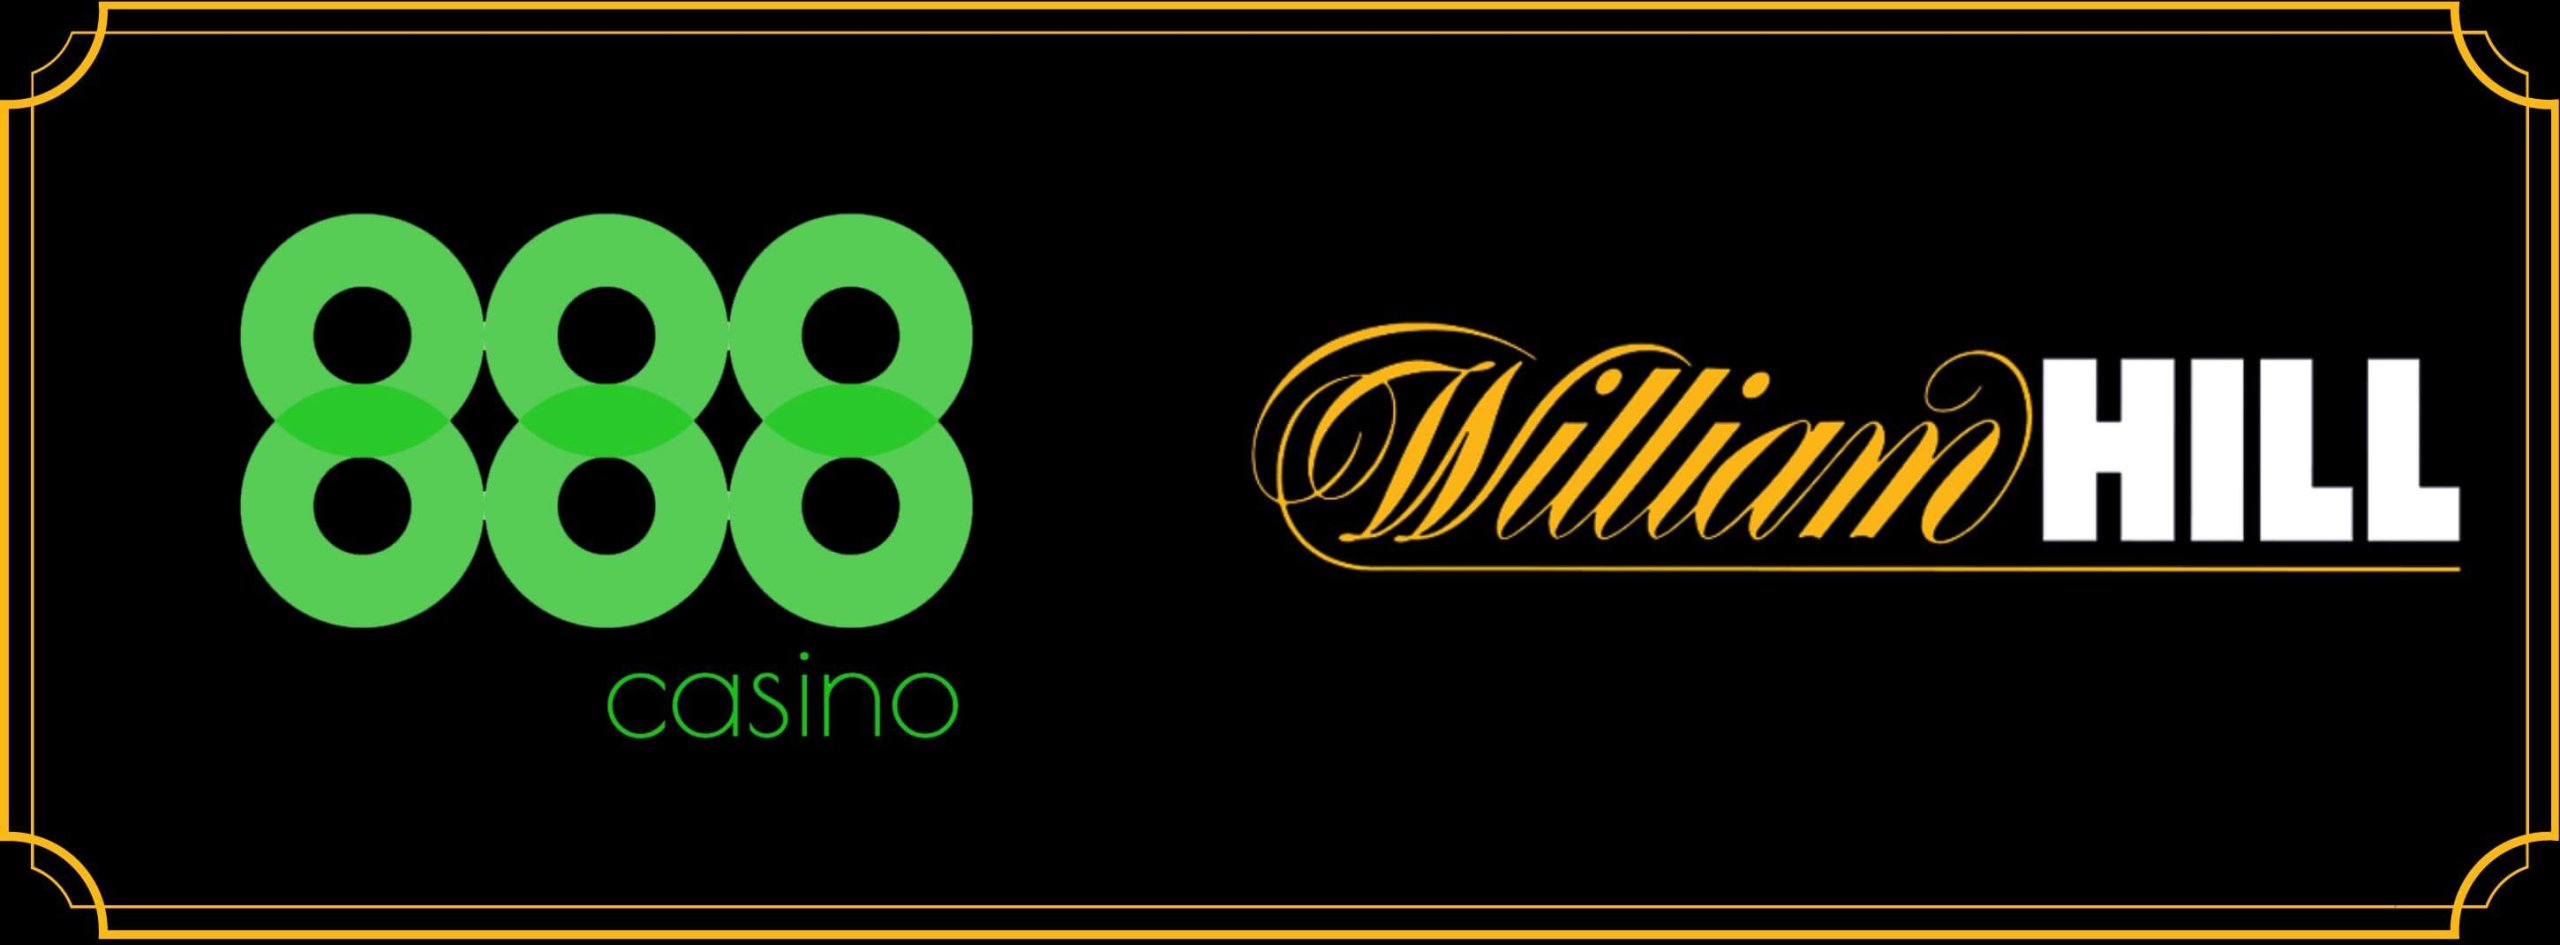 888 Confirms Acquisition of William Hill